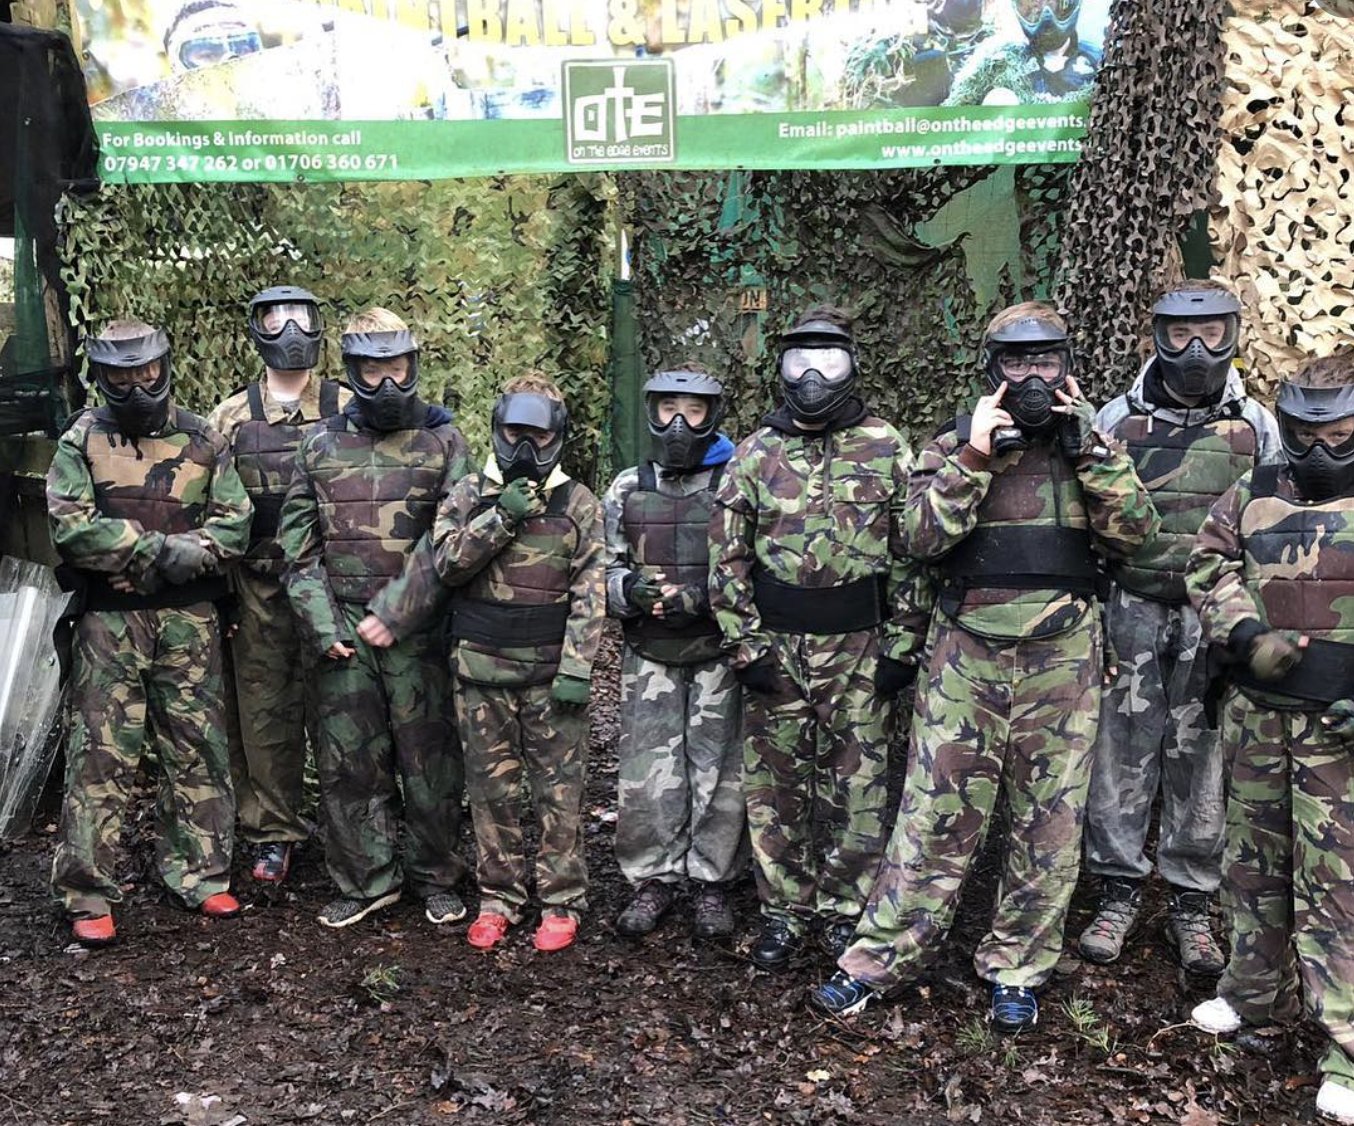 PaintBall Pay and play: - BlasterMastersPaintball events